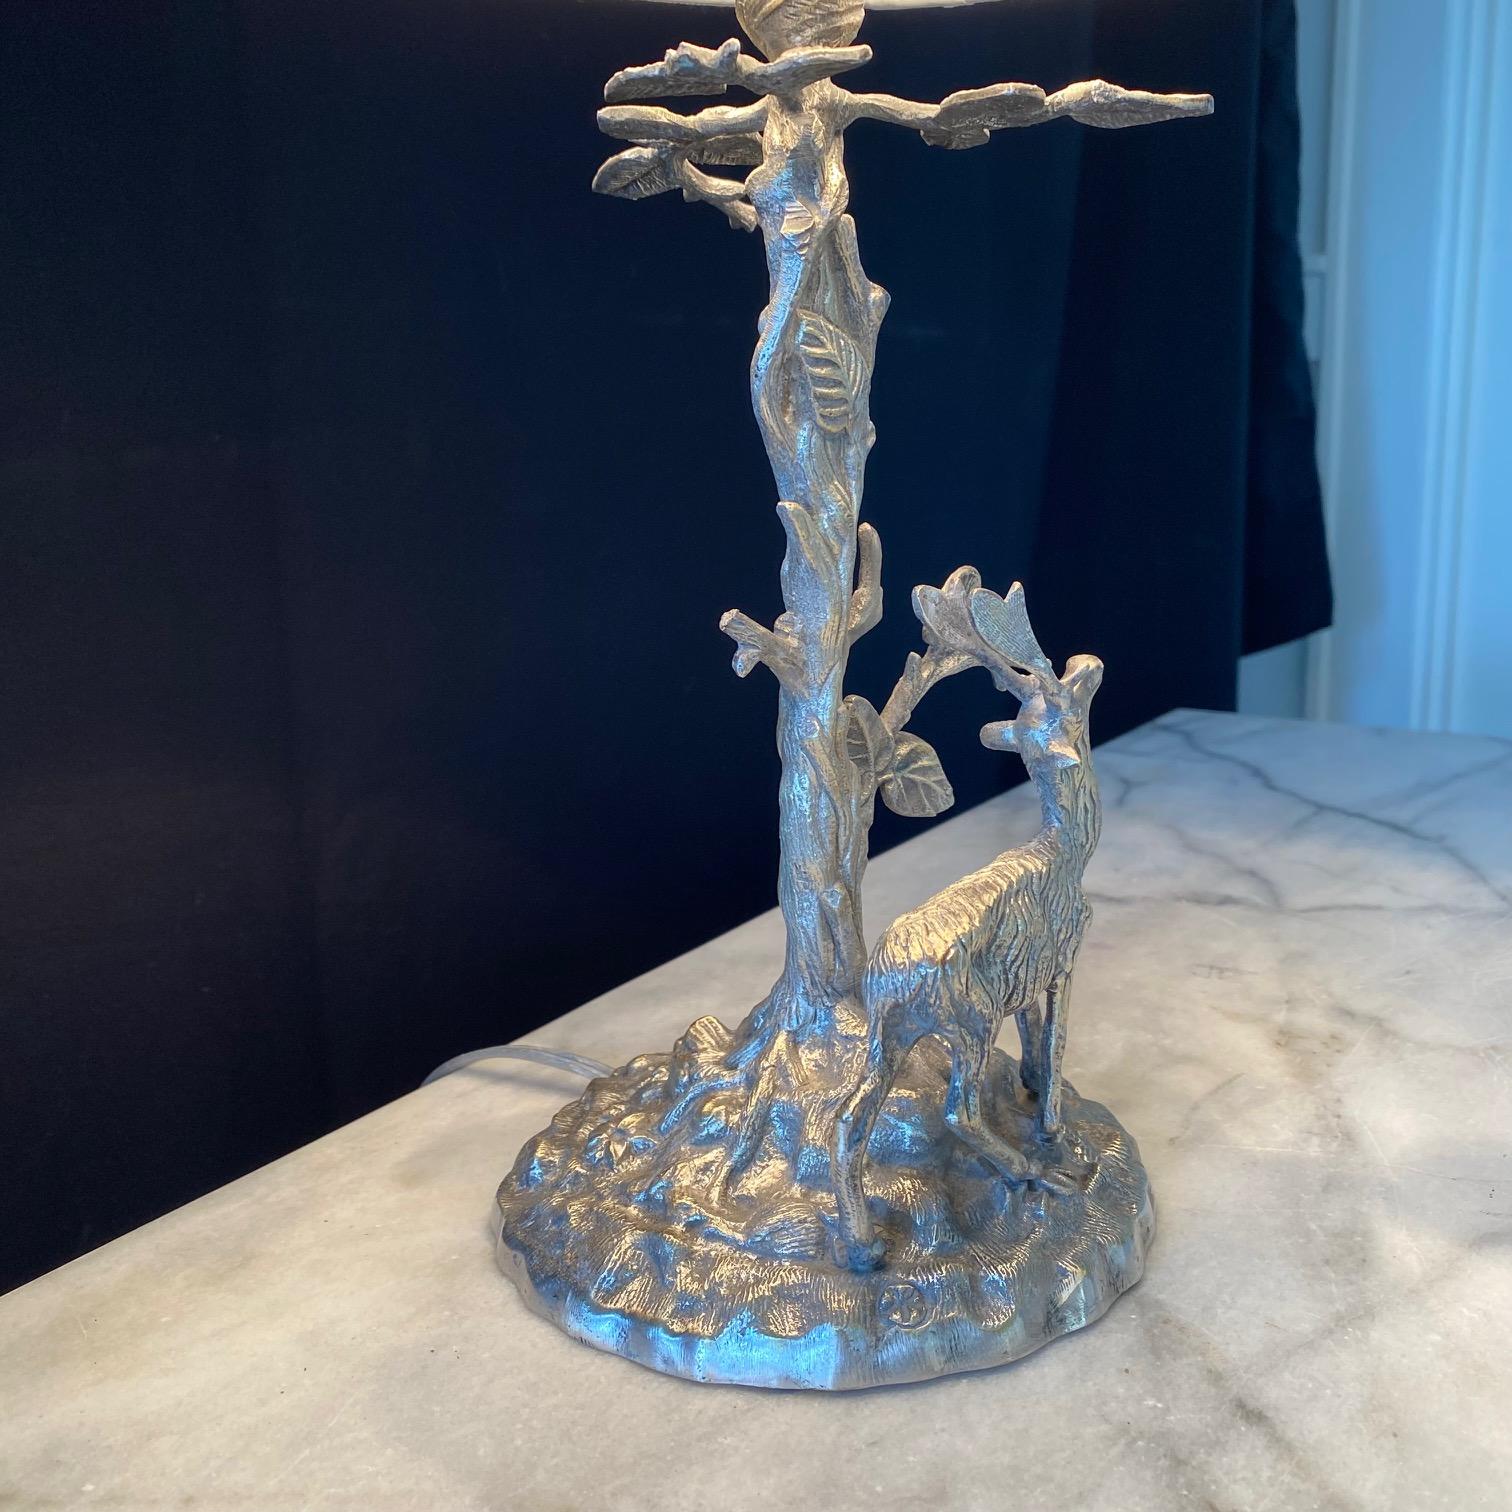  Silver Plated Bronze Deer Sculpture Table Lamp with Leaves and Twigs  1